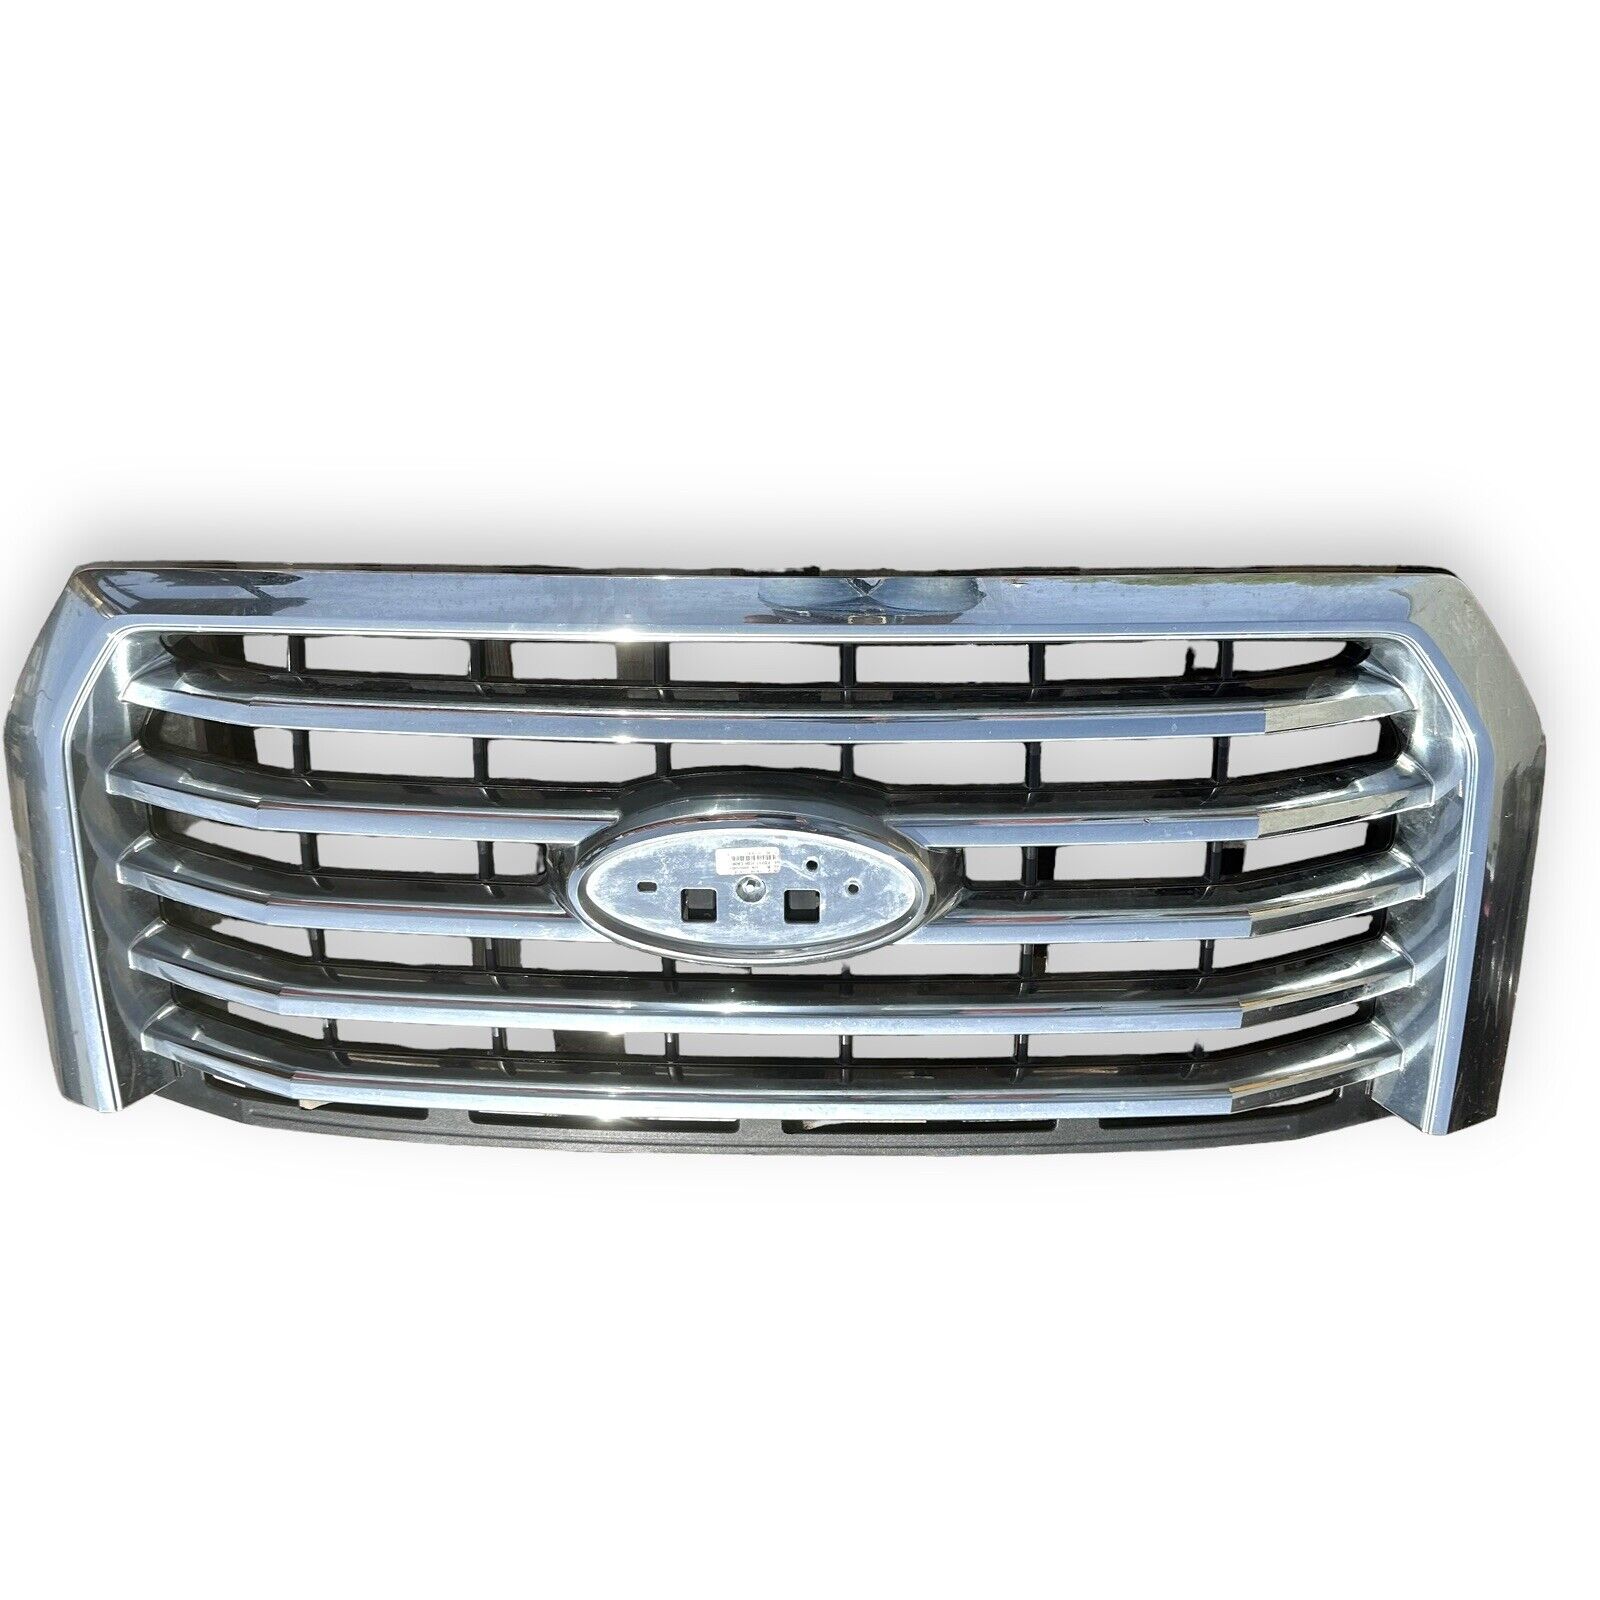 New Take Off OEM Ford F-150 2015 2016 2017 Front Chrome Grille Without Camera